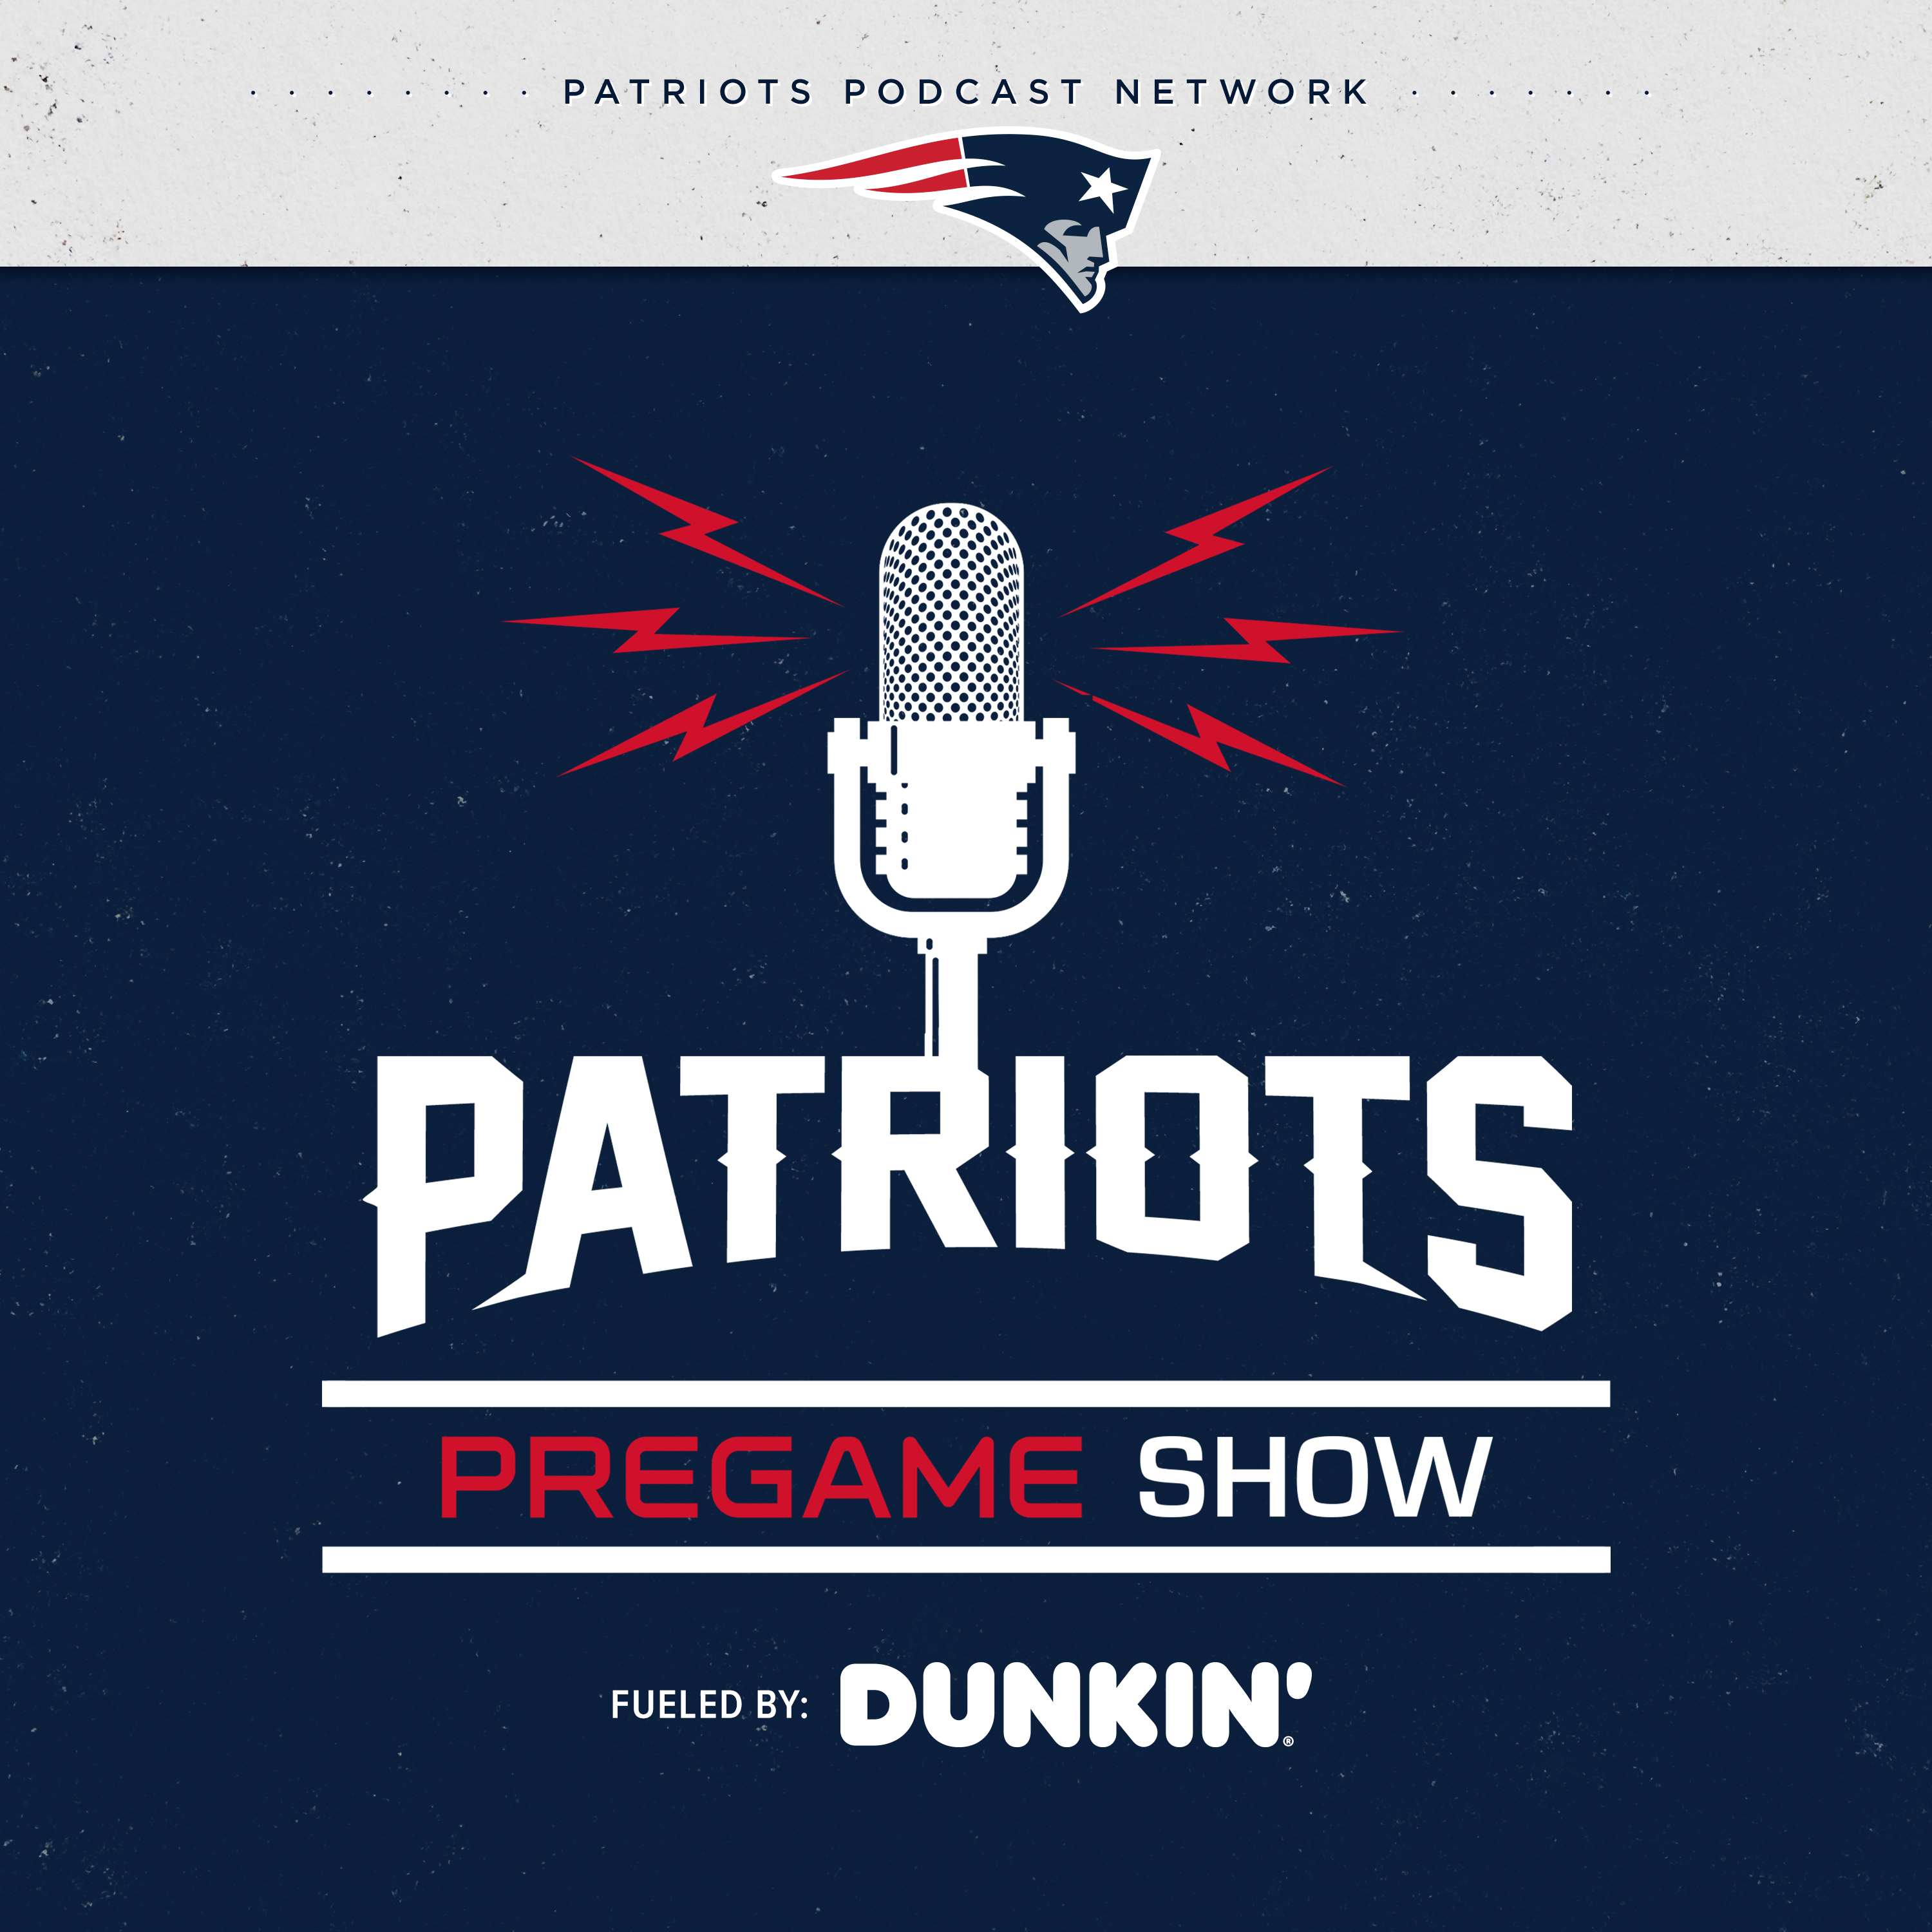 Patriots Pregame Show 12/18: Raiders Preview, Inactives Analysis and Keys to the Game